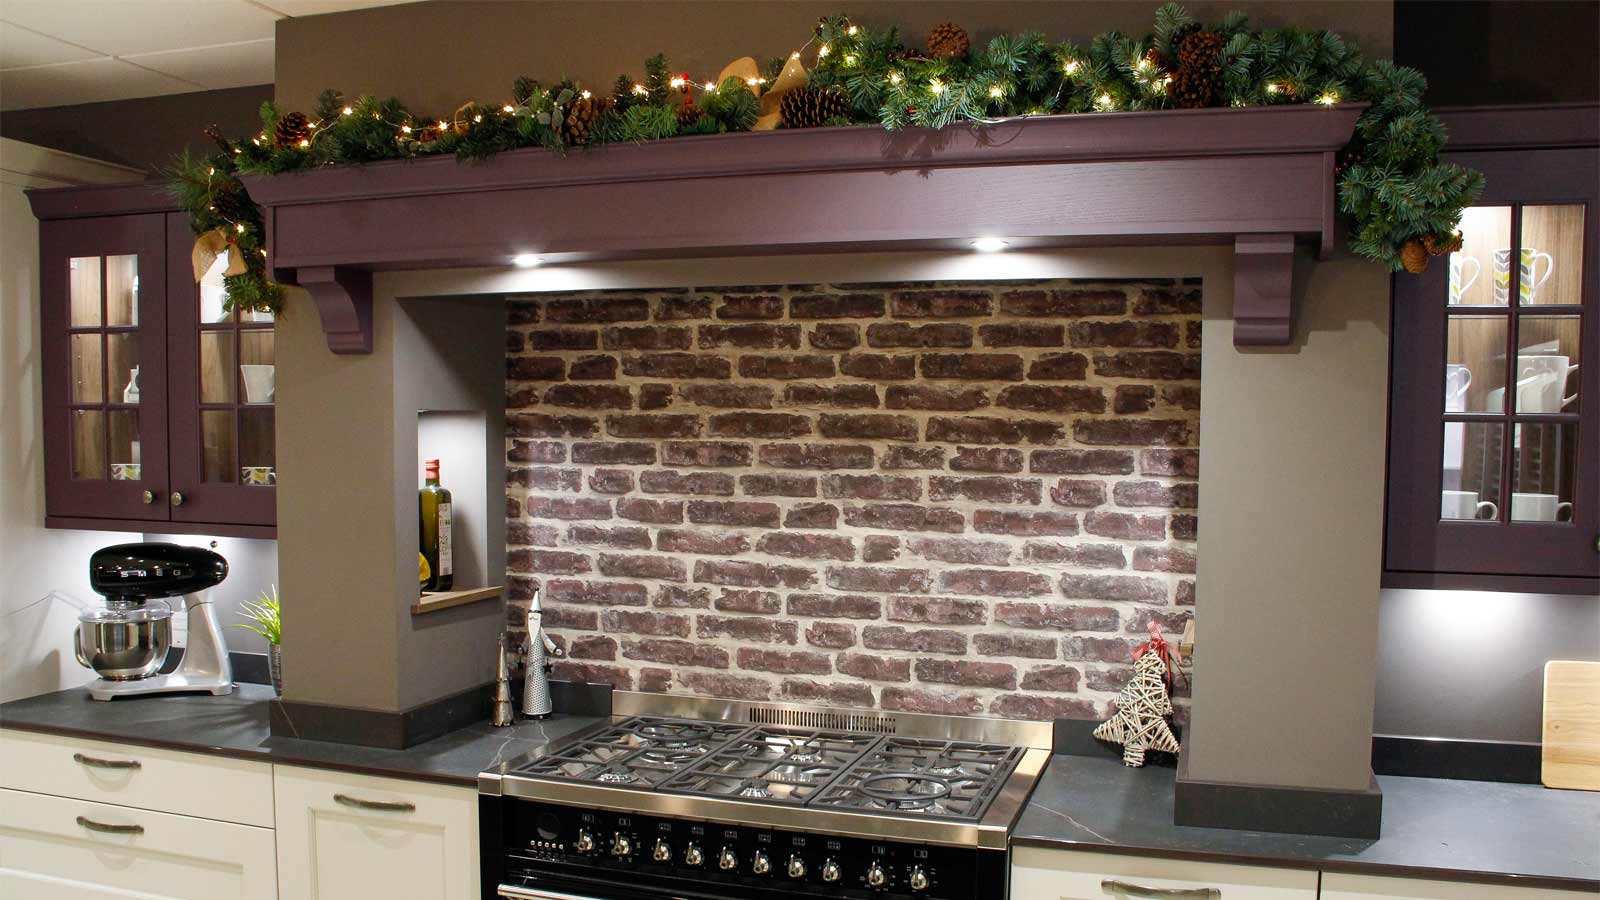 A kitchen hob with a cooker hood and Christmas decorations for a kitchen